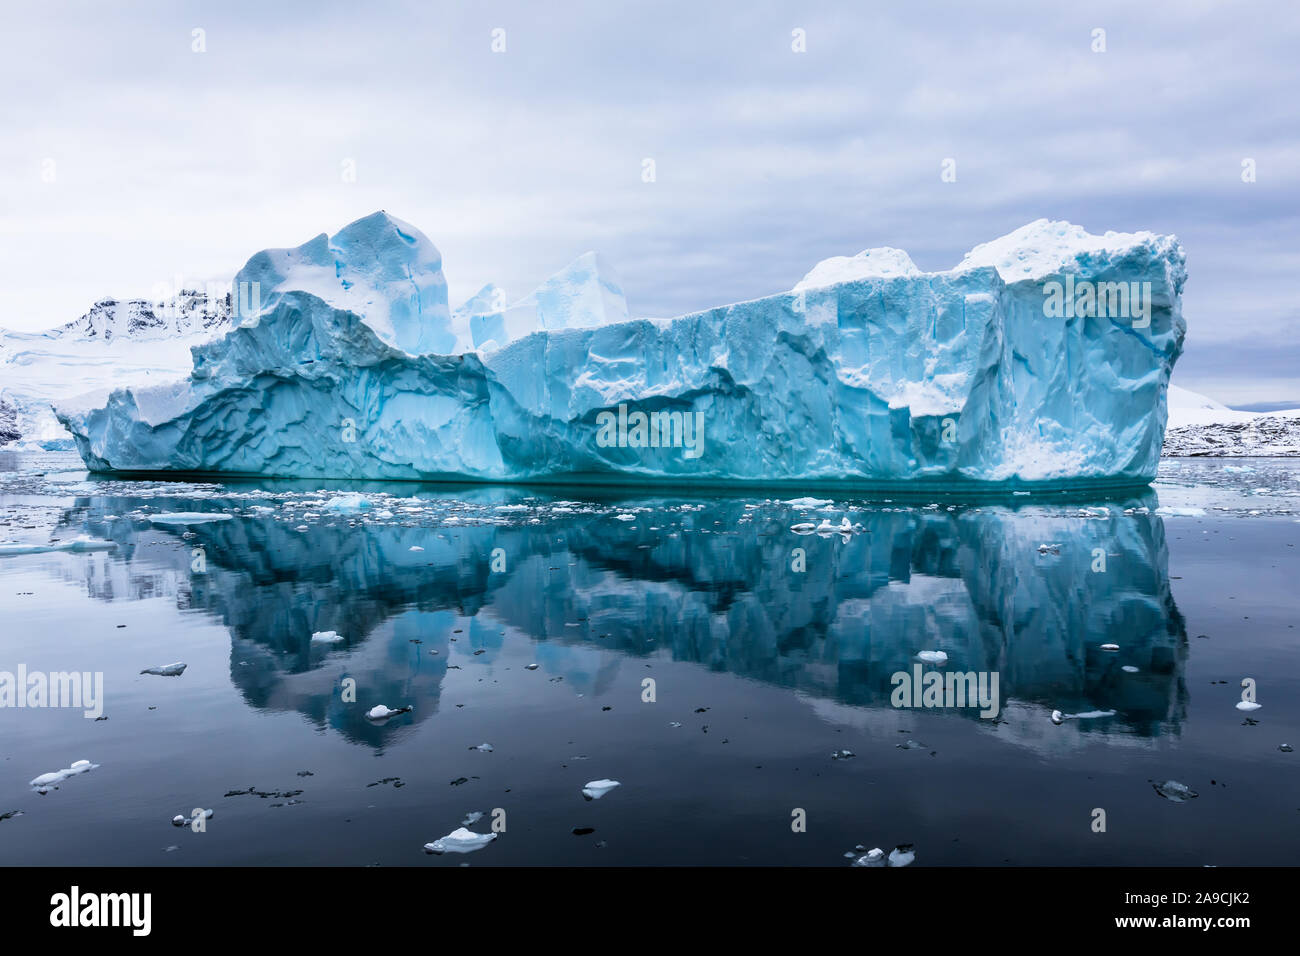 Impressive iceberg with blue ice and beautiful reflection on water in Antarctica, scenic landscape in Antarctic Peninsula Stock Photo